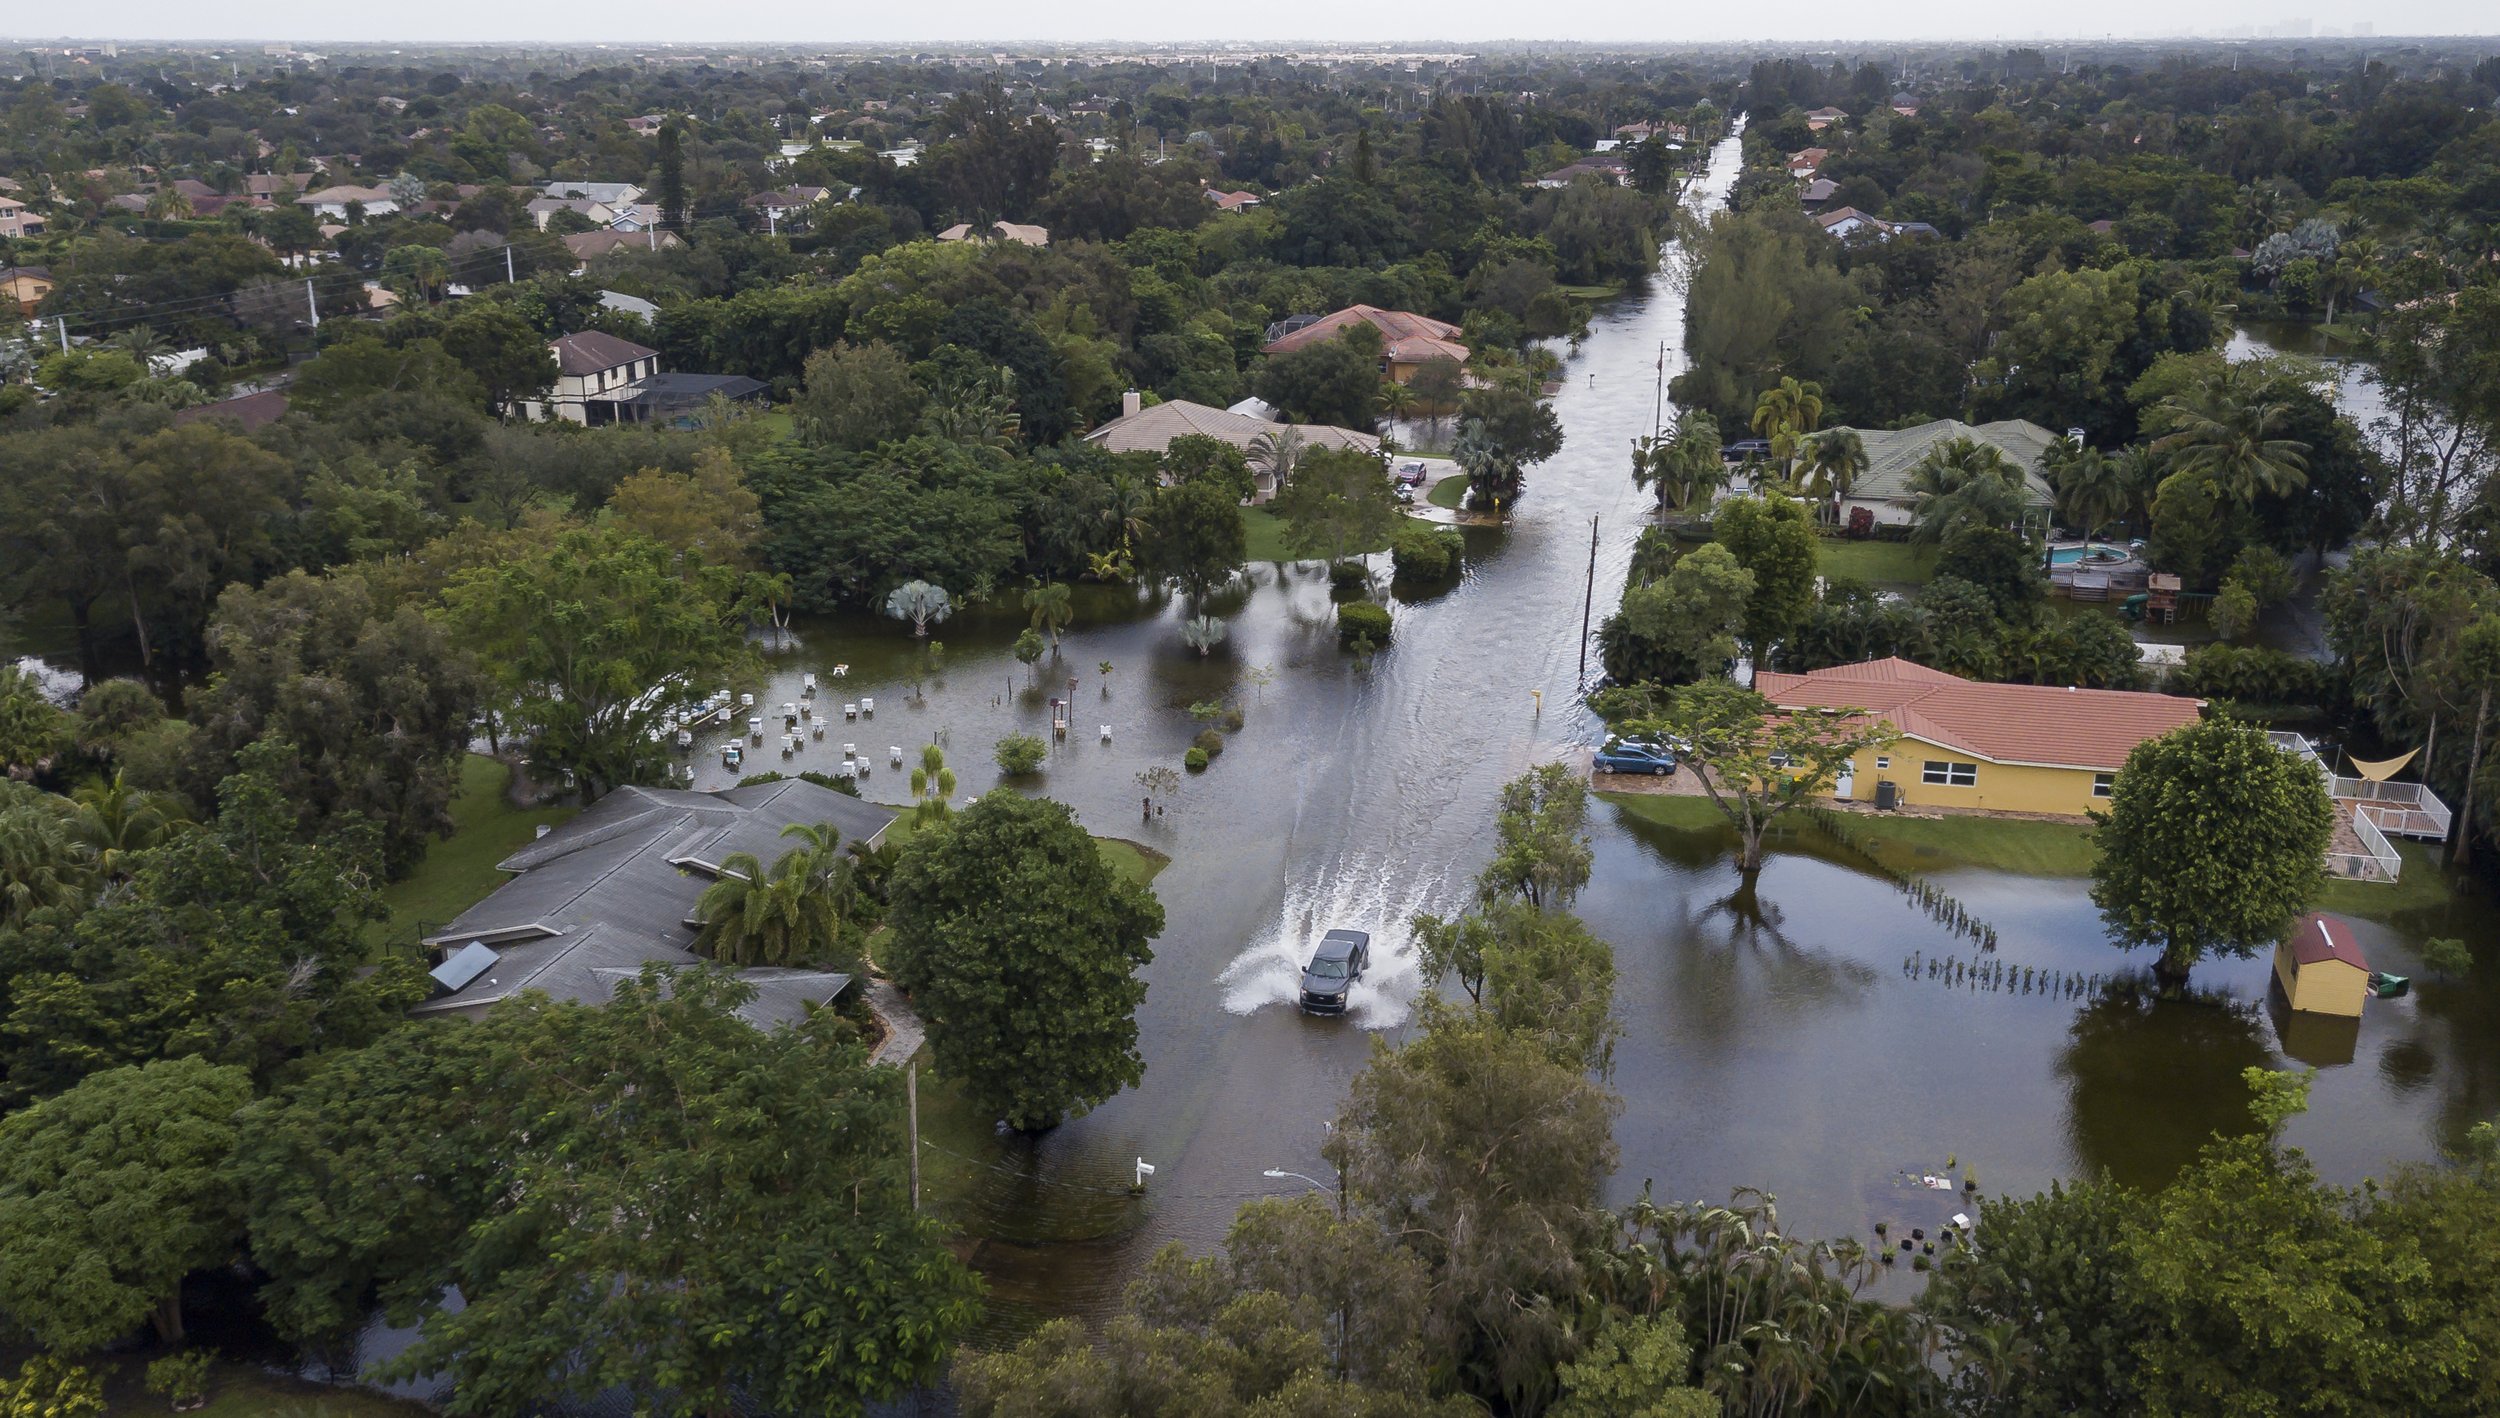  A car drives through a flooded street in a residential neighborhood in Plantation, Florida on Monday, November 9, 2020. Tropical Storm Eta made its way past South Florida Sunday night leaving roads and neighborhoods flooded. 